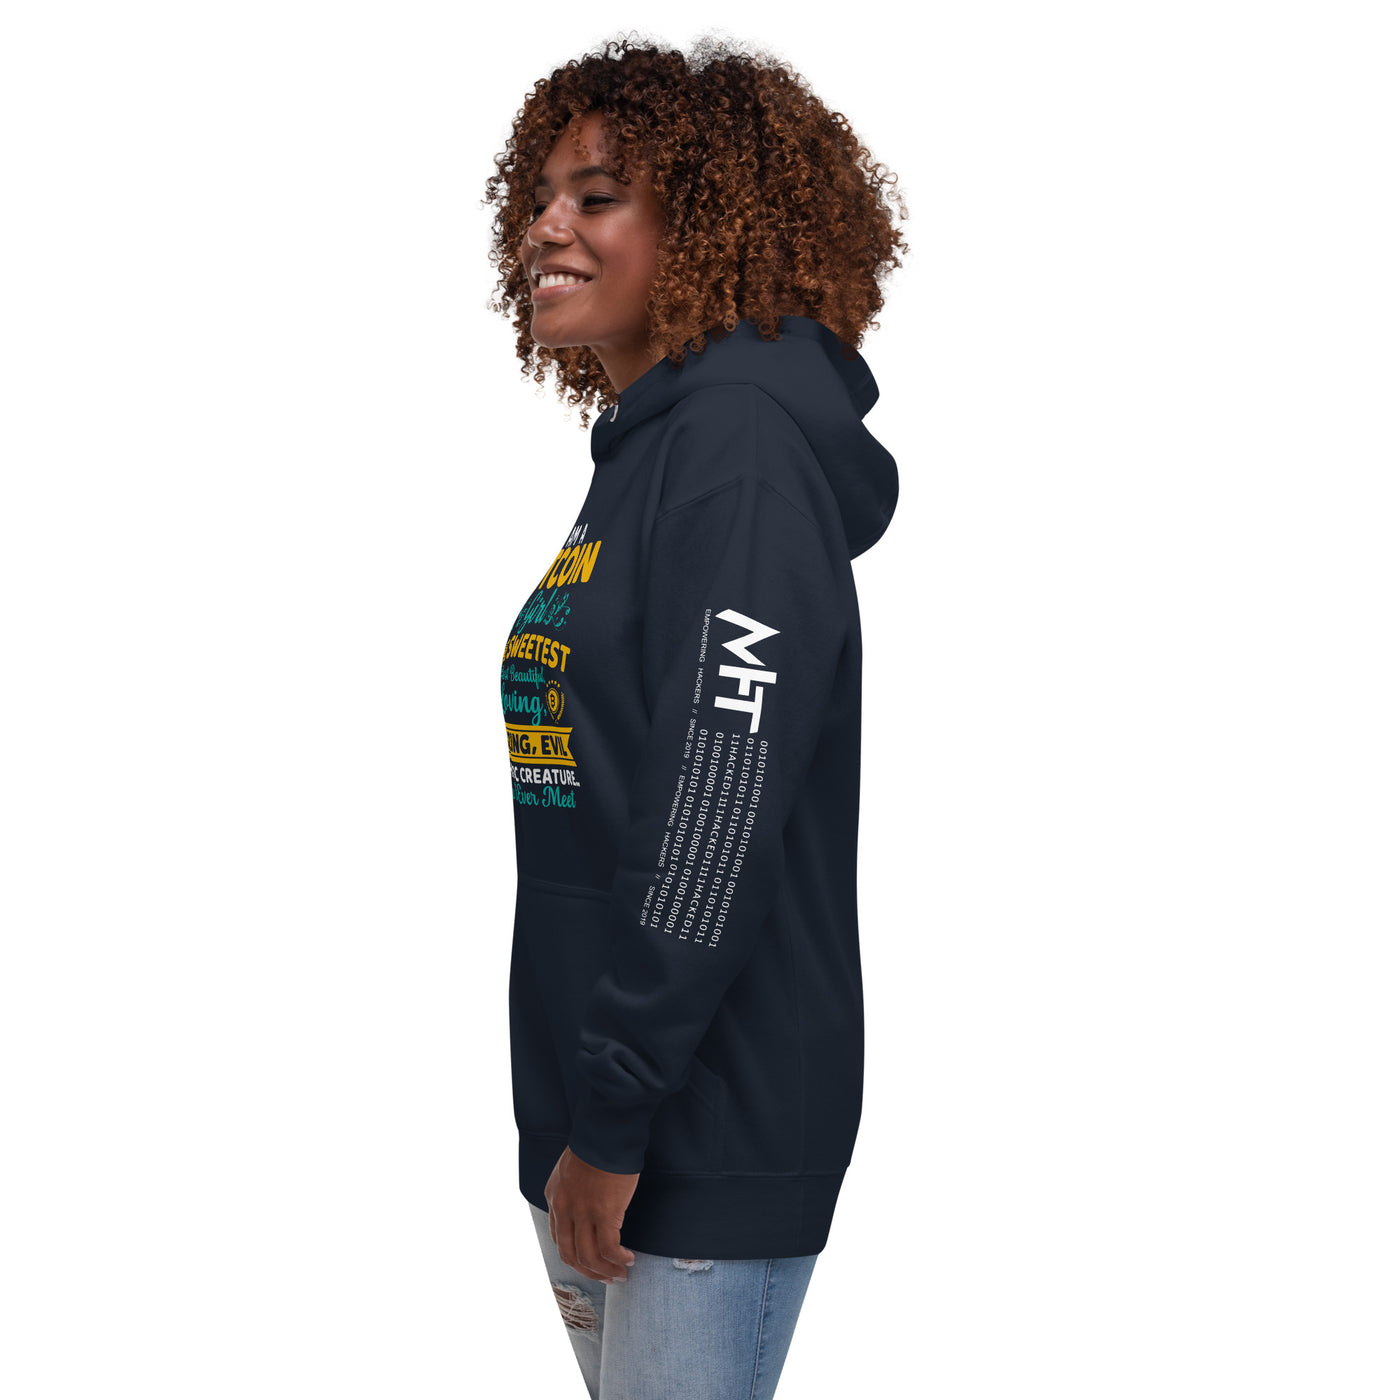 I am a Bitcoin Girl, the sweetest - Unisex Hoodie